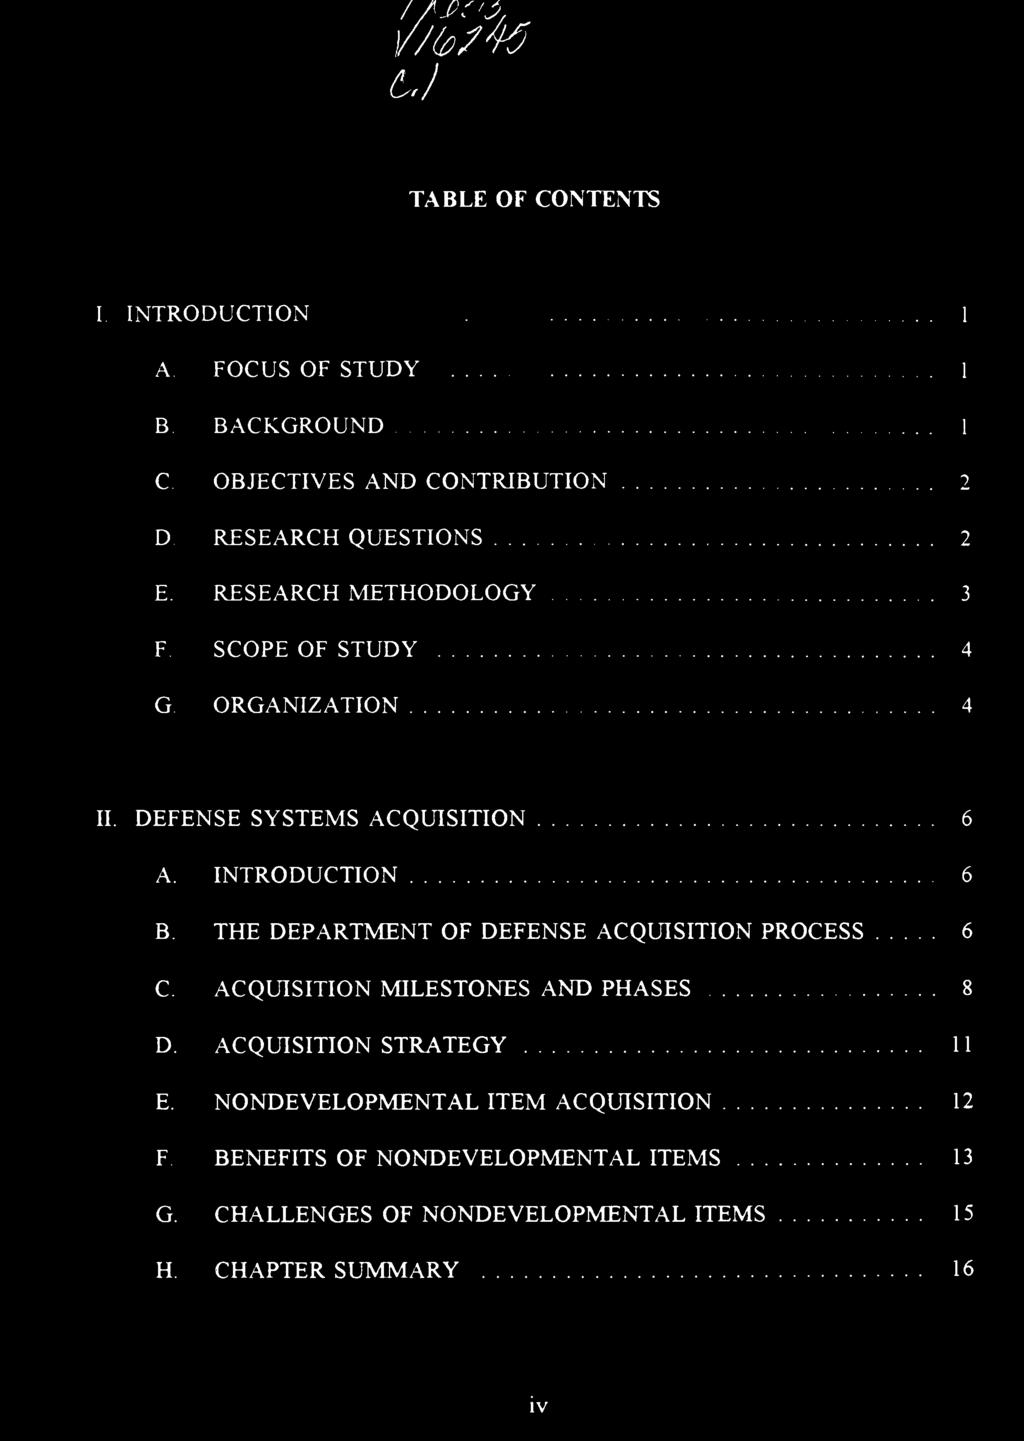 THE DEPARTMENT OF DEFENSE ACQUISITION PROCESS 6 C ACQUISITION MILESTONES AND PHASES 8 D.